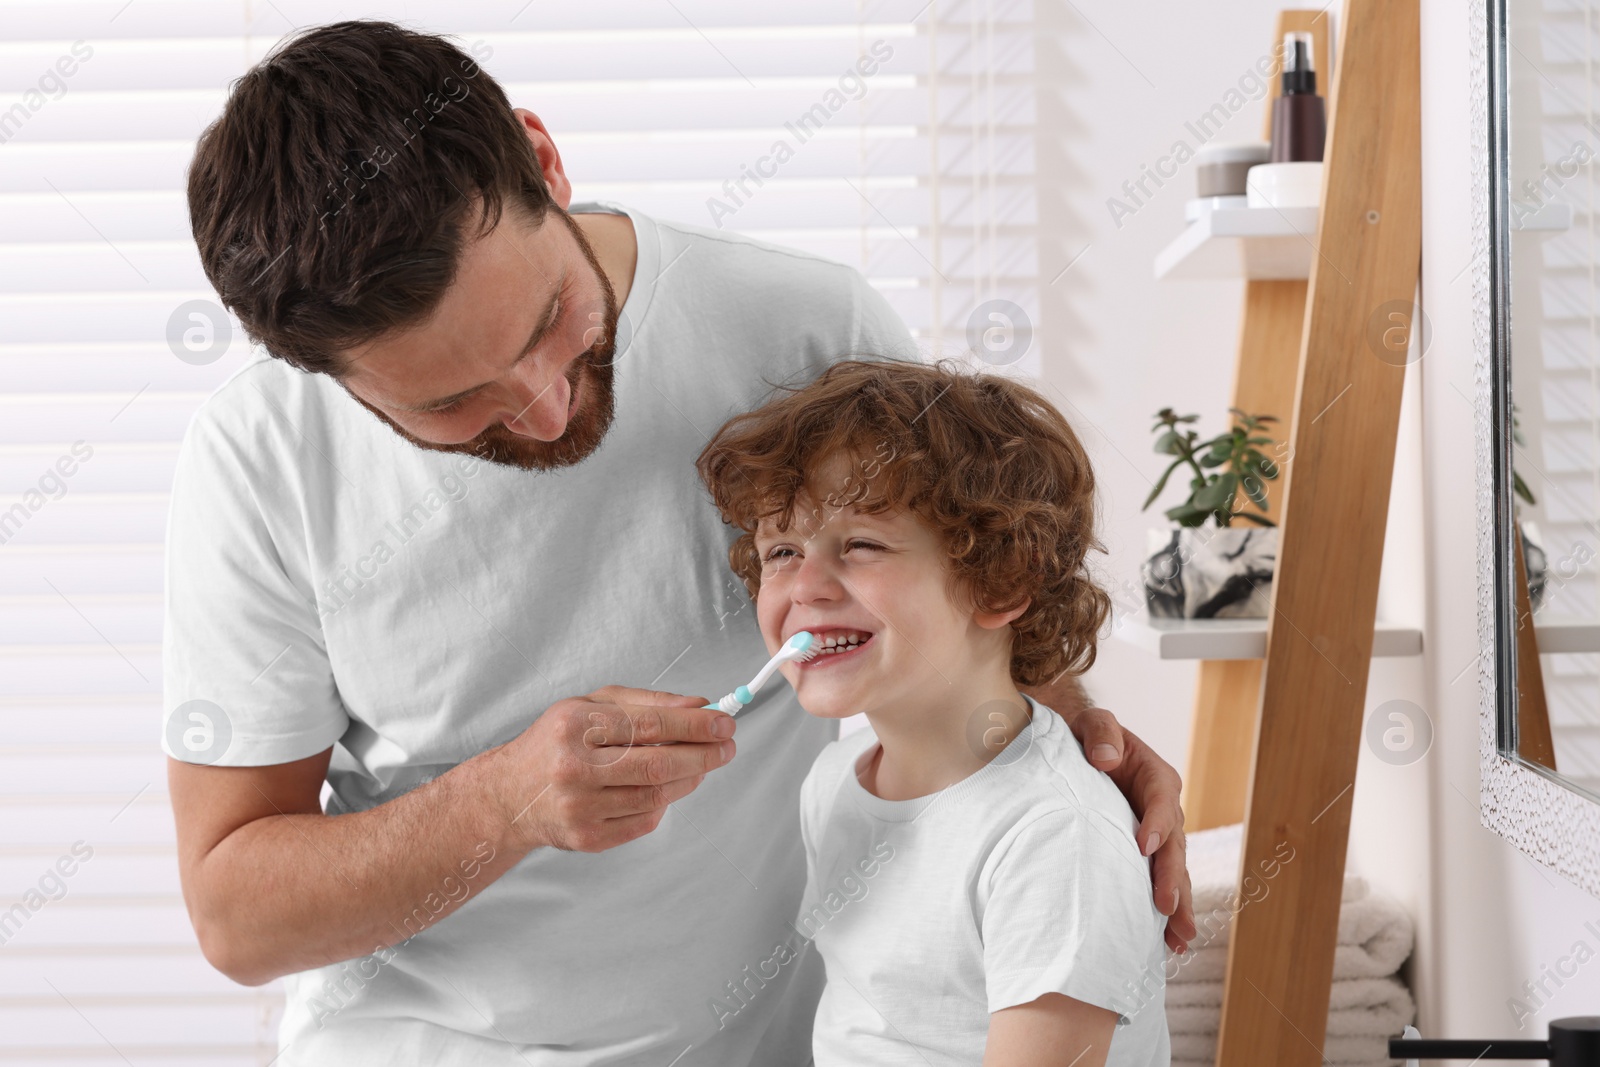 Photo of Father helping his son to brush teeth in bathroom